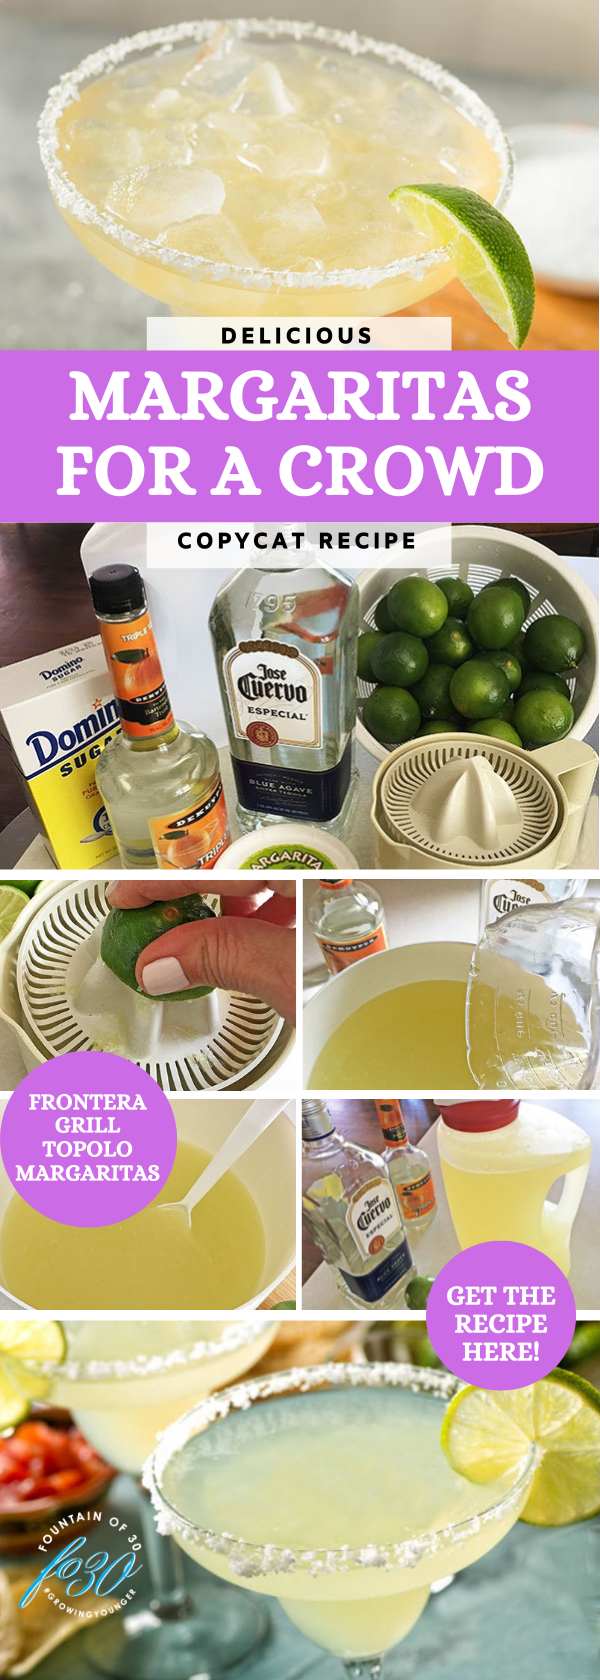 how to make and serve frresh margaritas for a crowd fountainof30